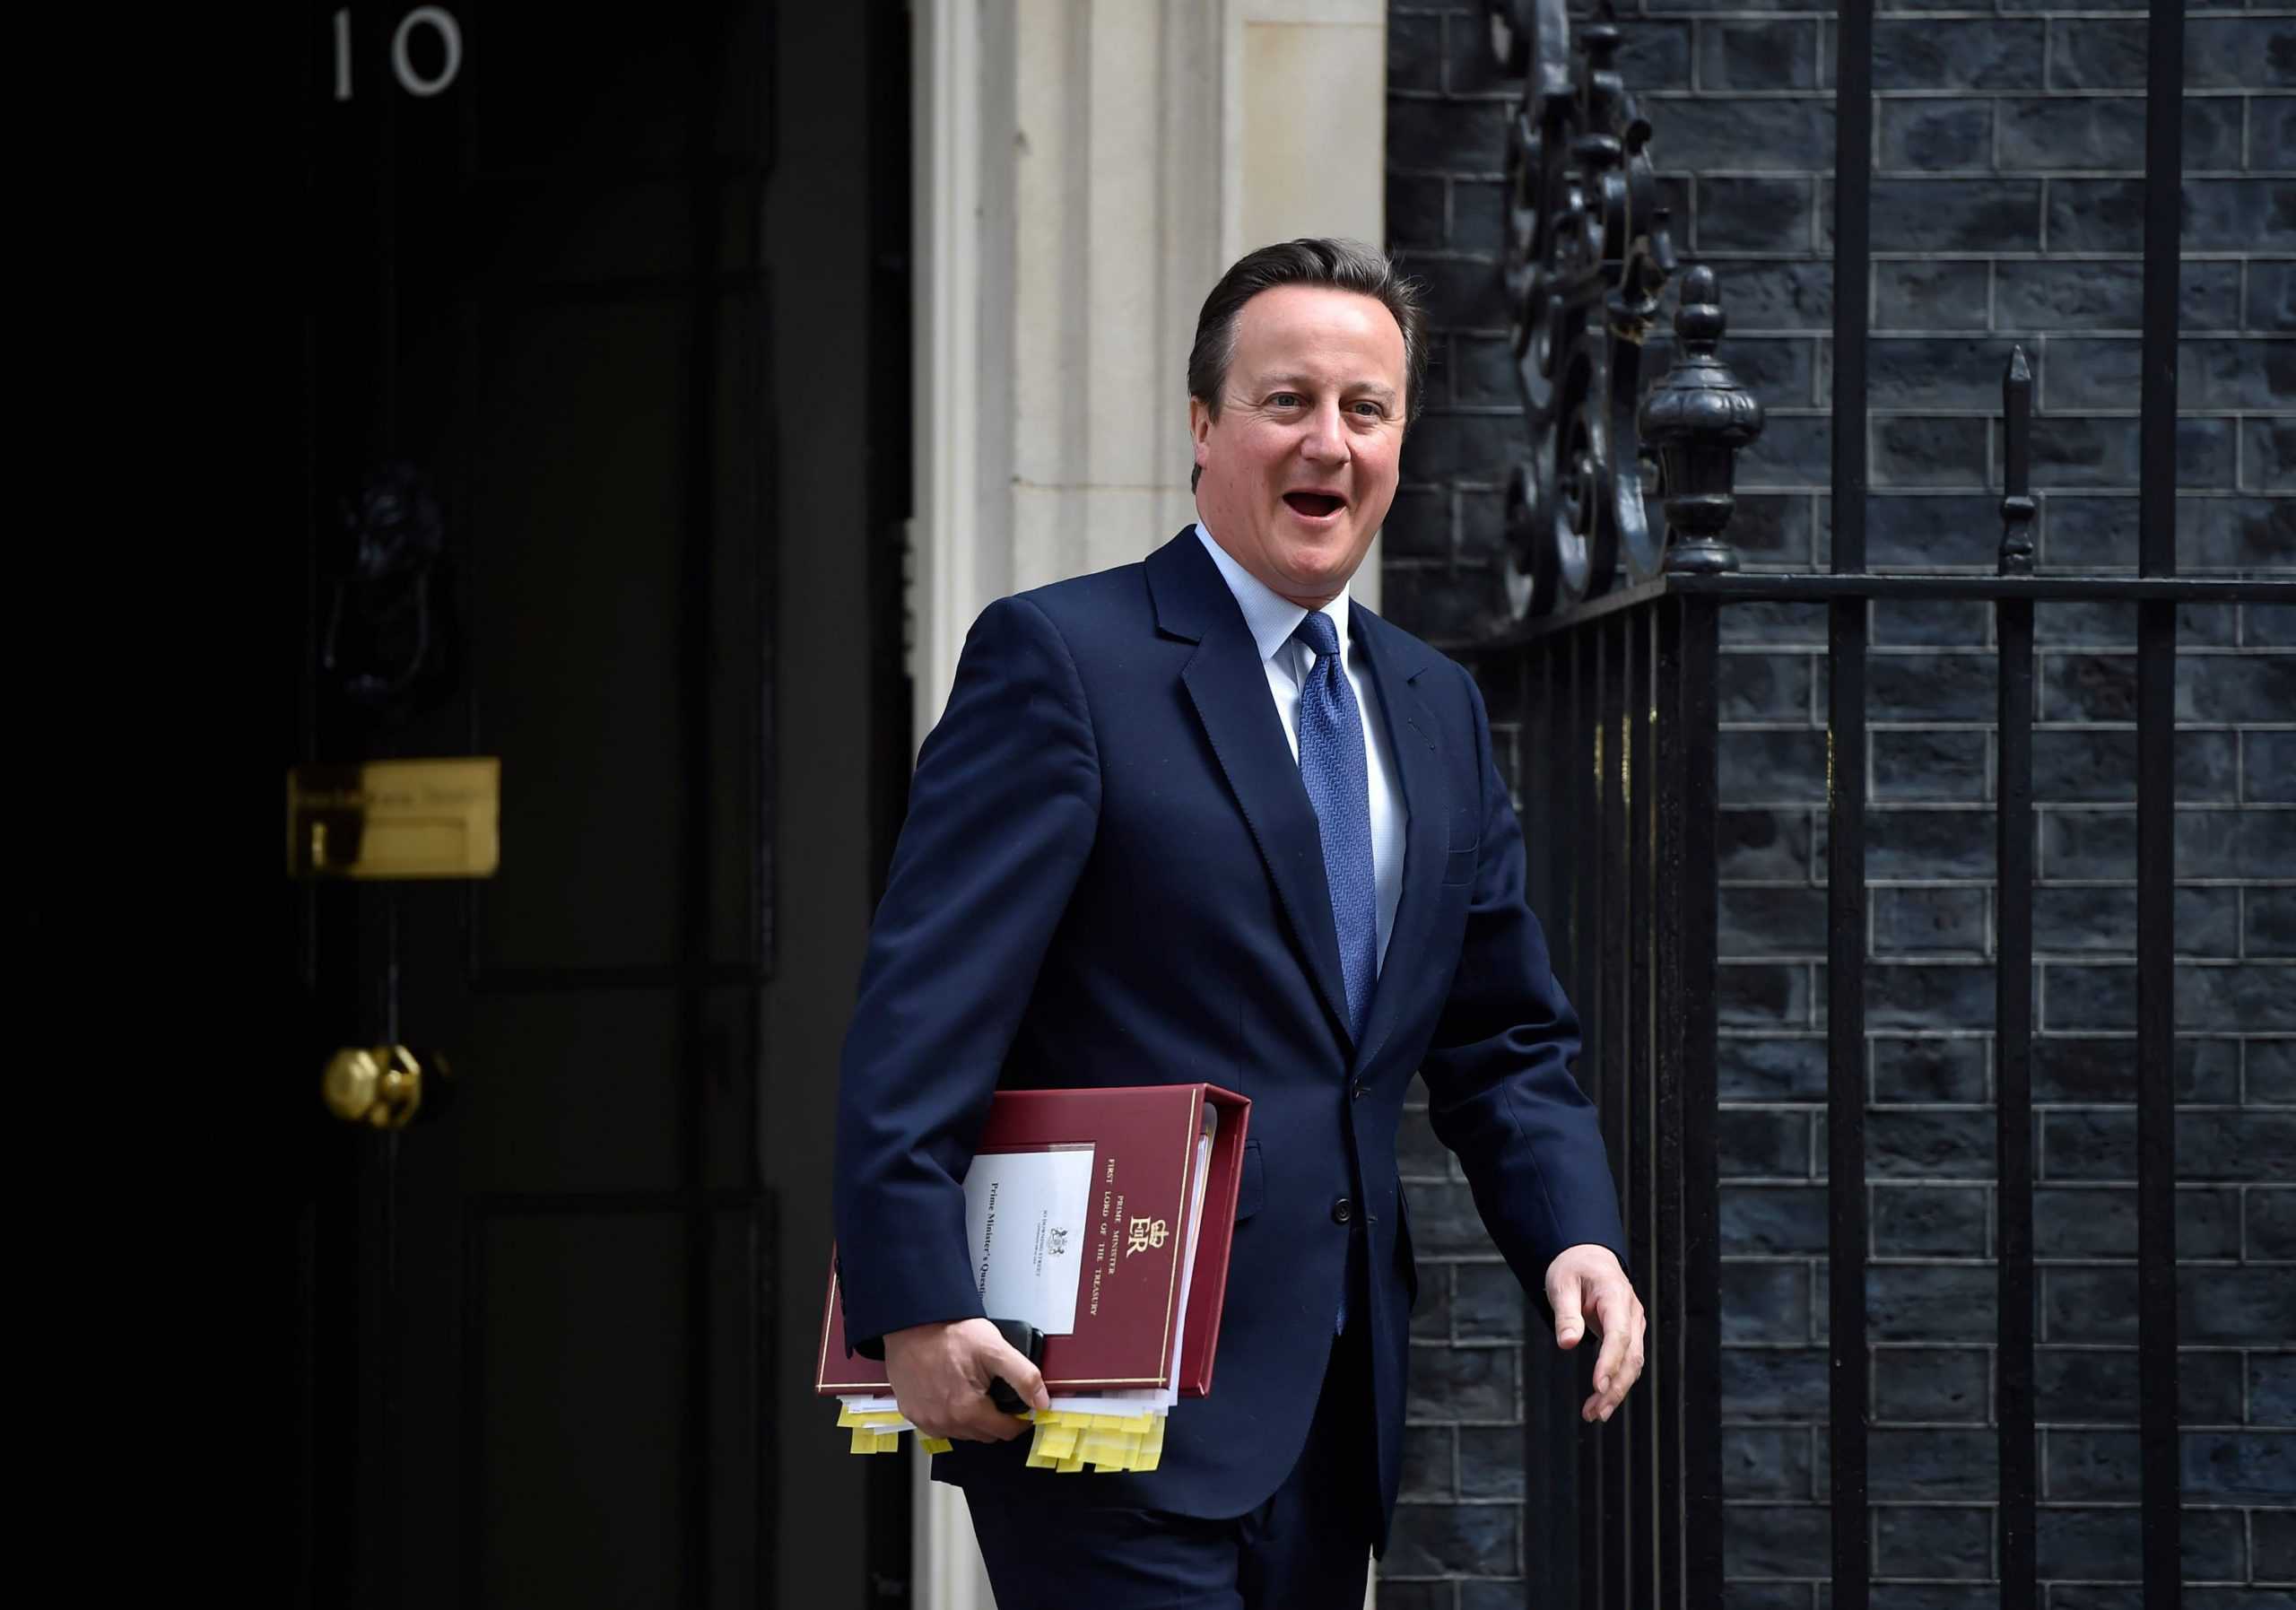 Cameron lobbied for access to NHS data at peak of first virus wave